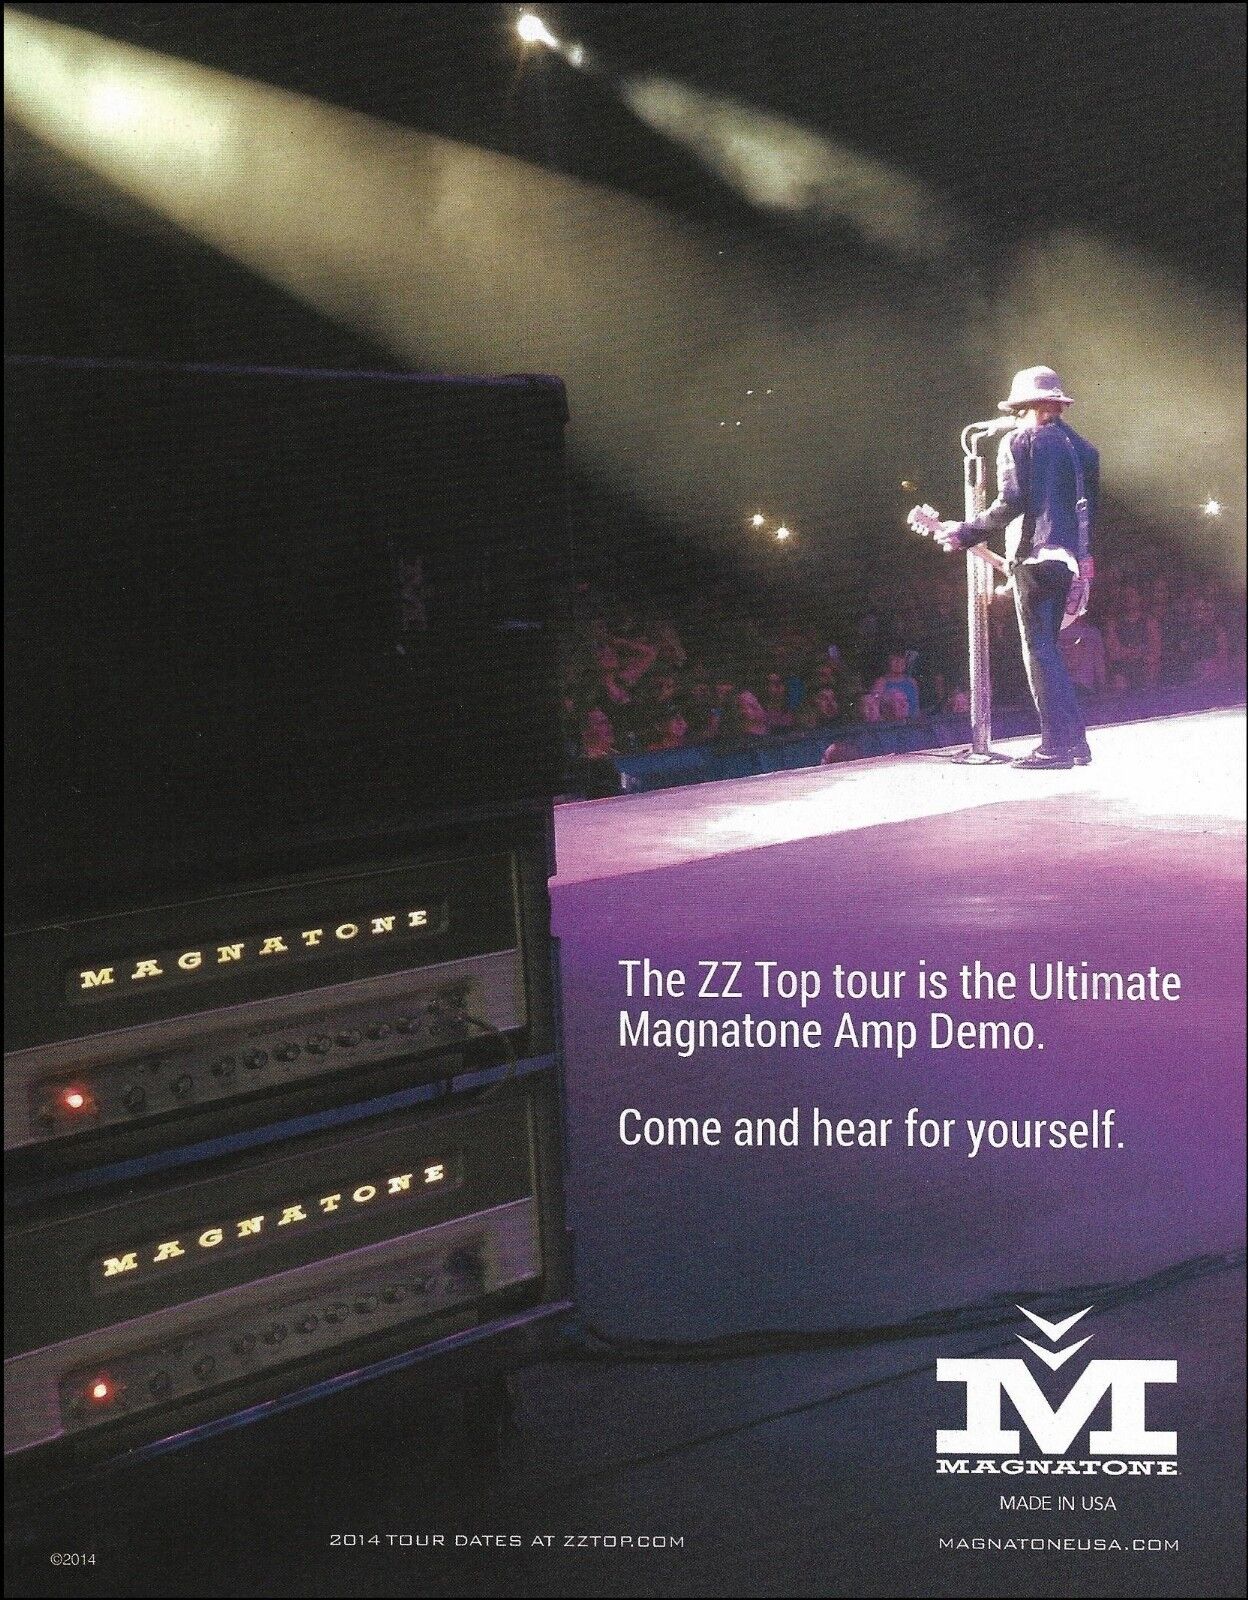 ZZ Top Billy Gibbons 2014 Magnatone guitar amp ad 8 x 11 advertisement print